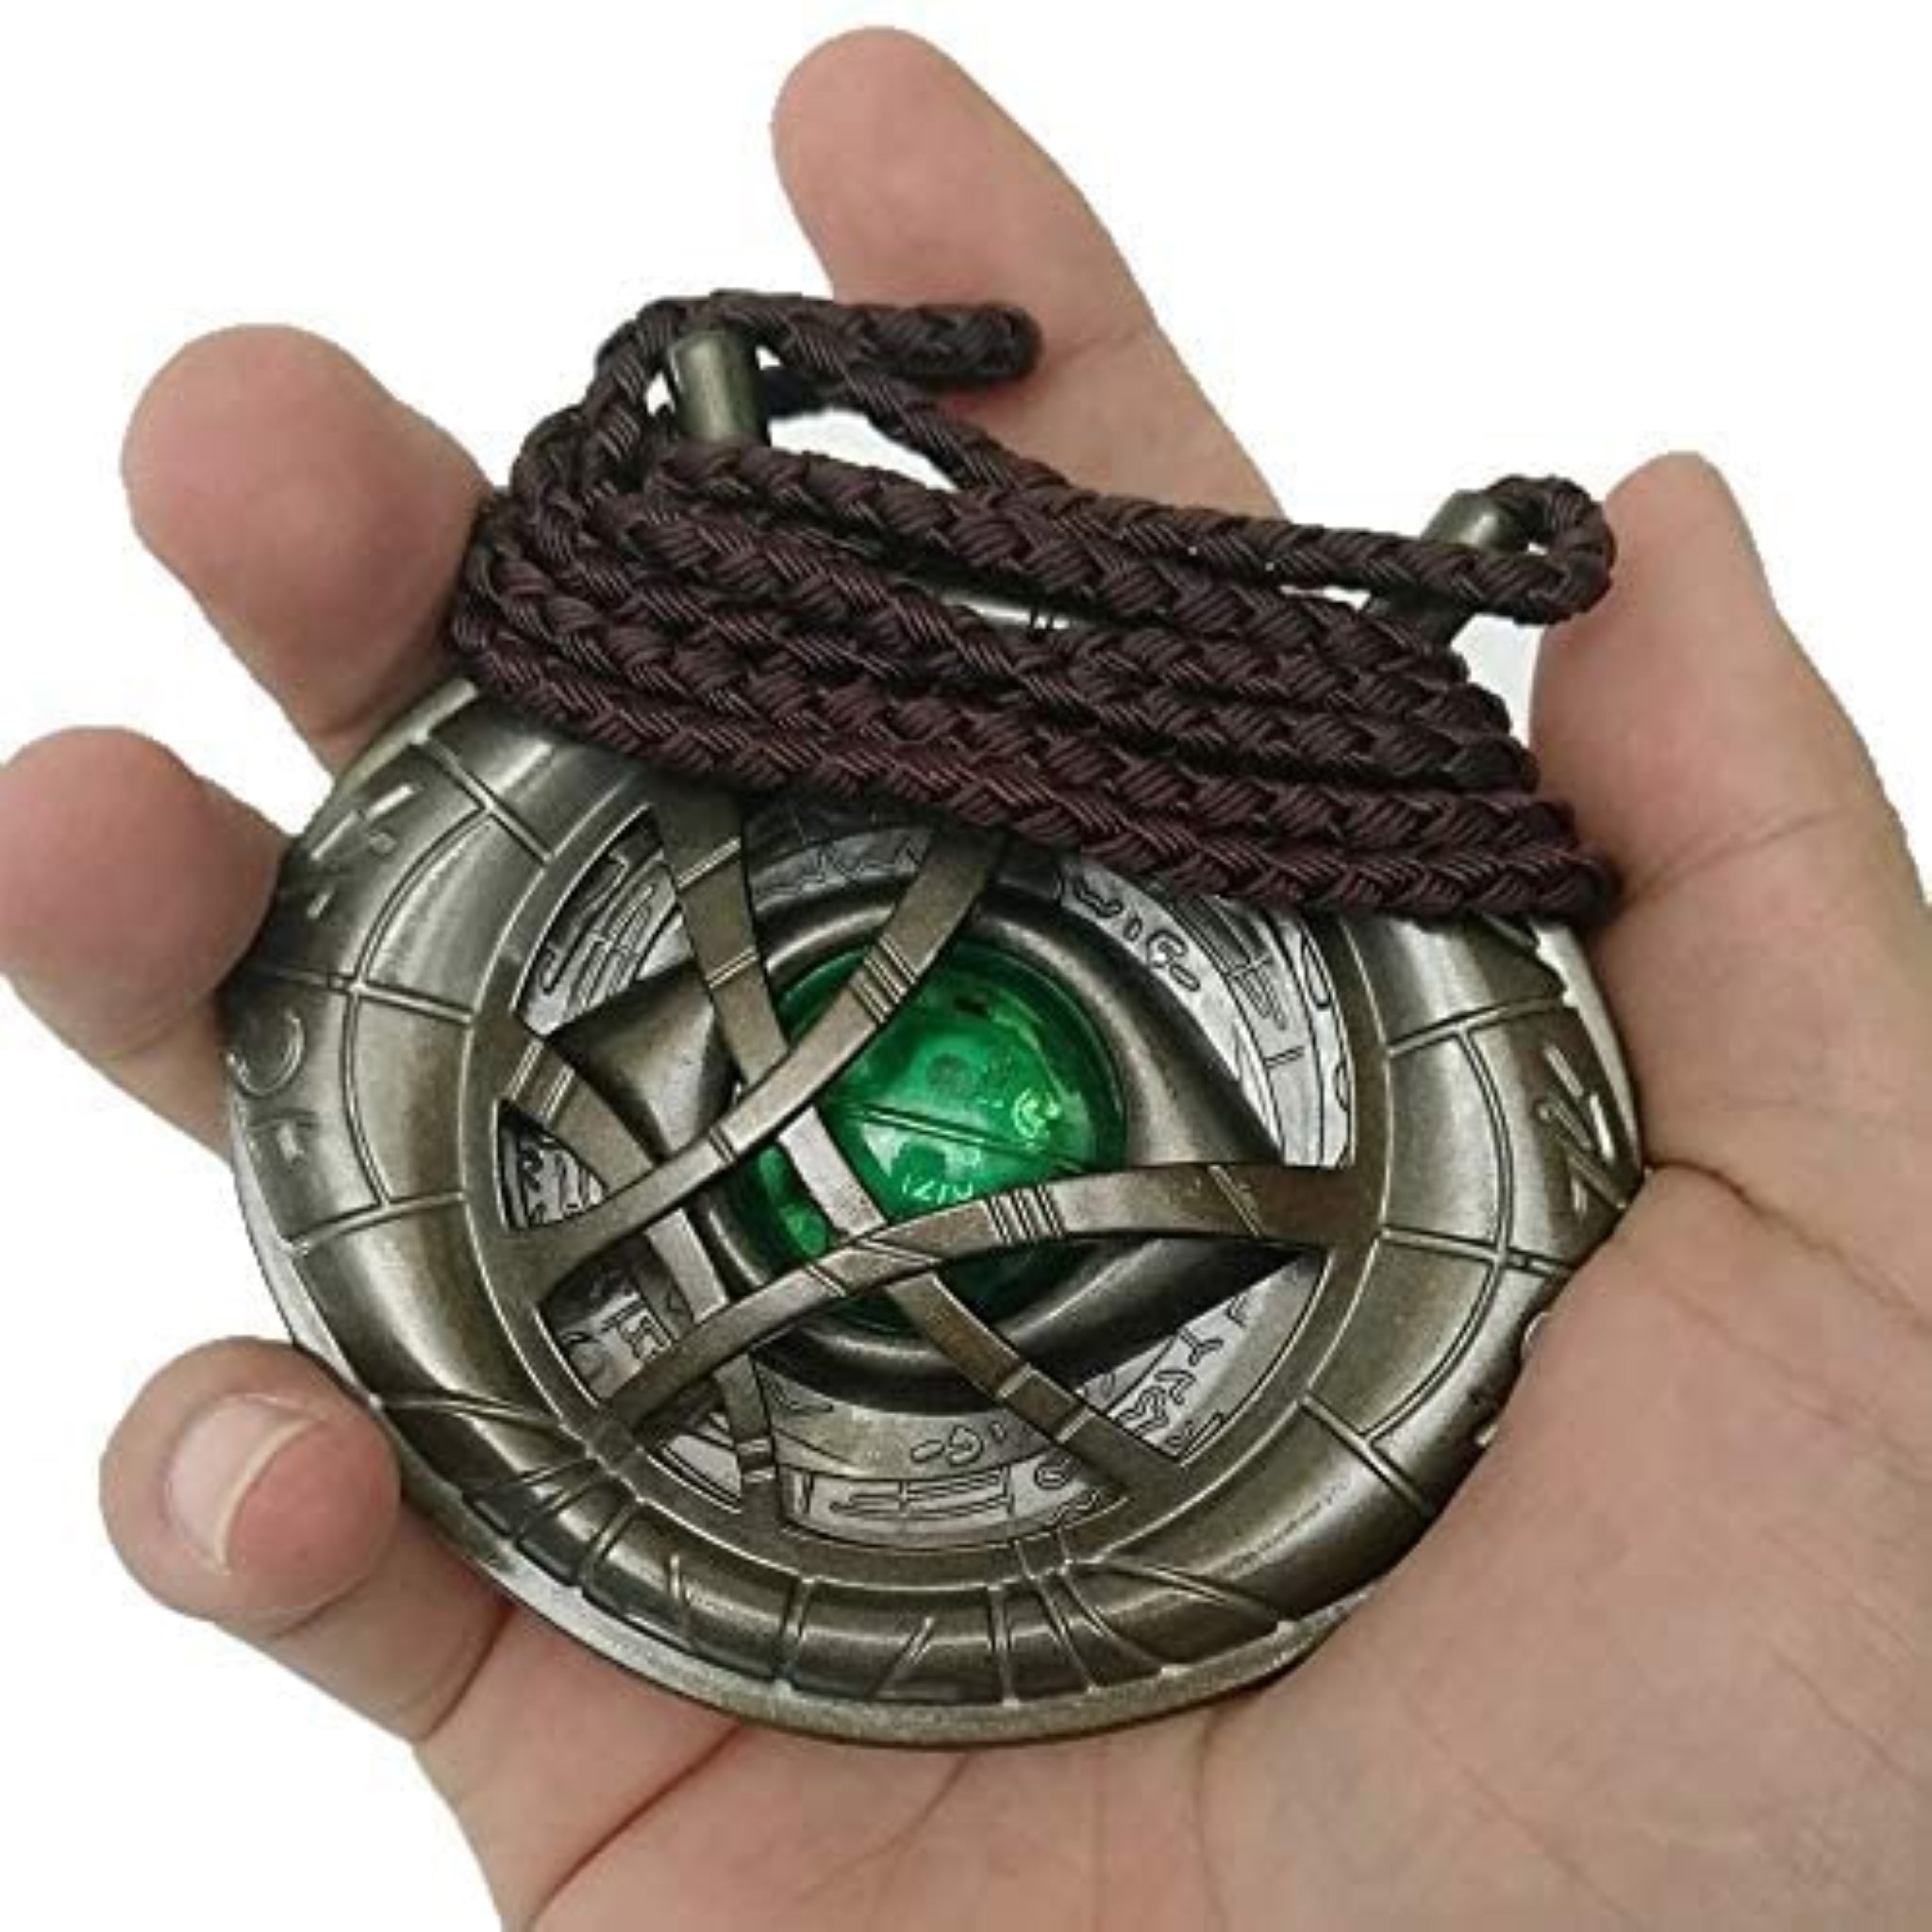 Marvel Doctor Strange Eye Of Agamotto Necklace with Box Light-Up LED Metal Replica